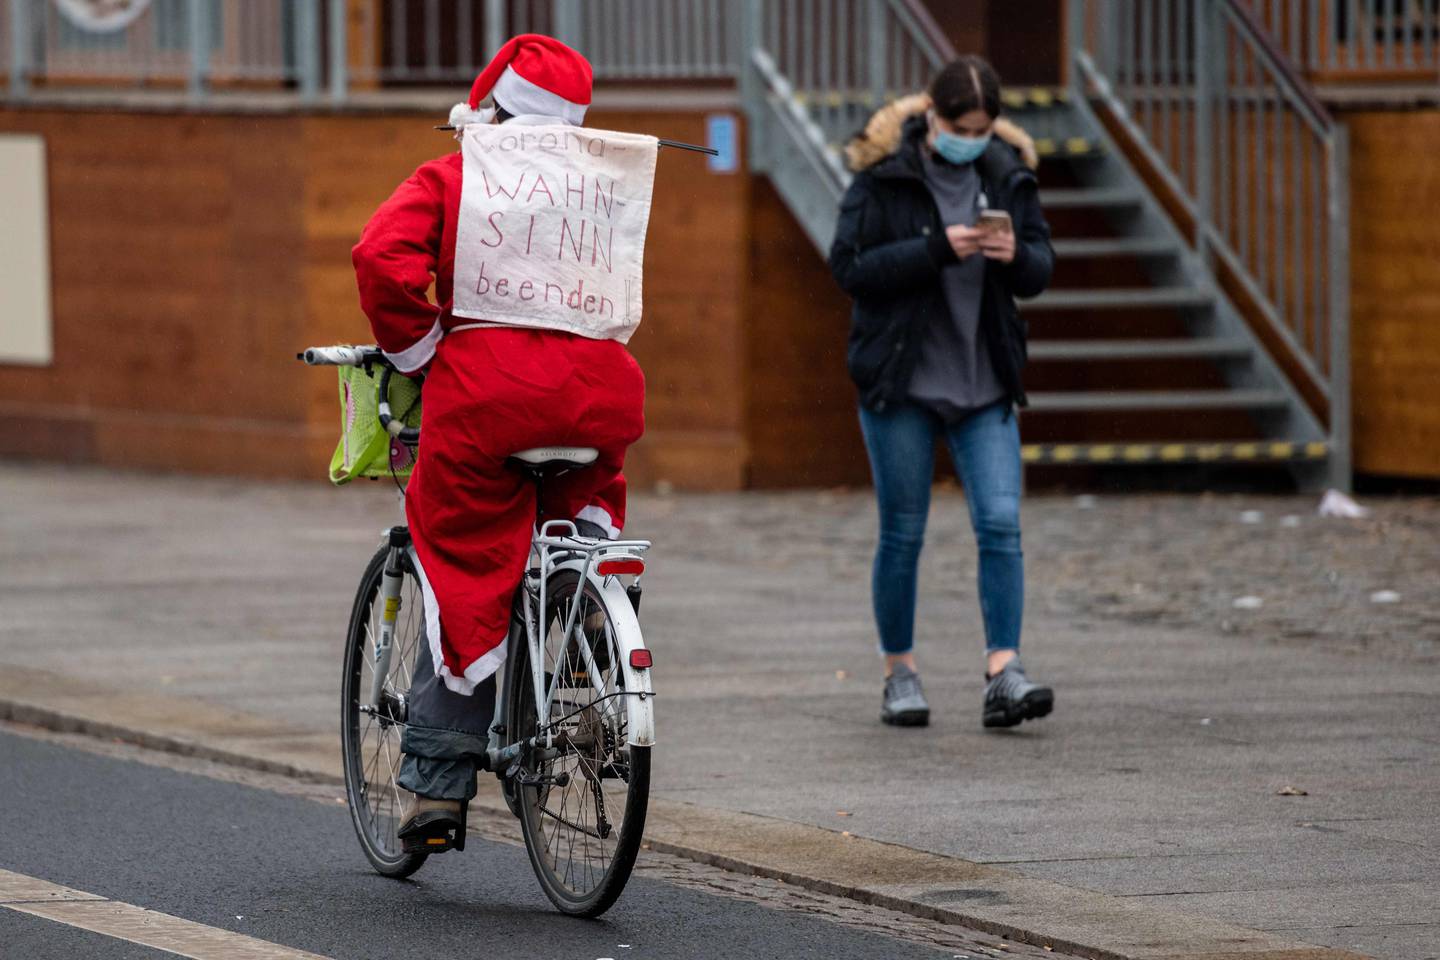 A cyclist dressed as Santa Claus drives through the city center with a poster reading "End the Corona madness" at Neumarkt in Dresden, eastern Germany on December 12, 2020. - The planned demonstration of the "Querdenken" movement protesting against measures imposed by the German government to limit the spread of the novel coronavirus COVID-19 was banned by several court orders. (Photo by STRINGER / AFP)